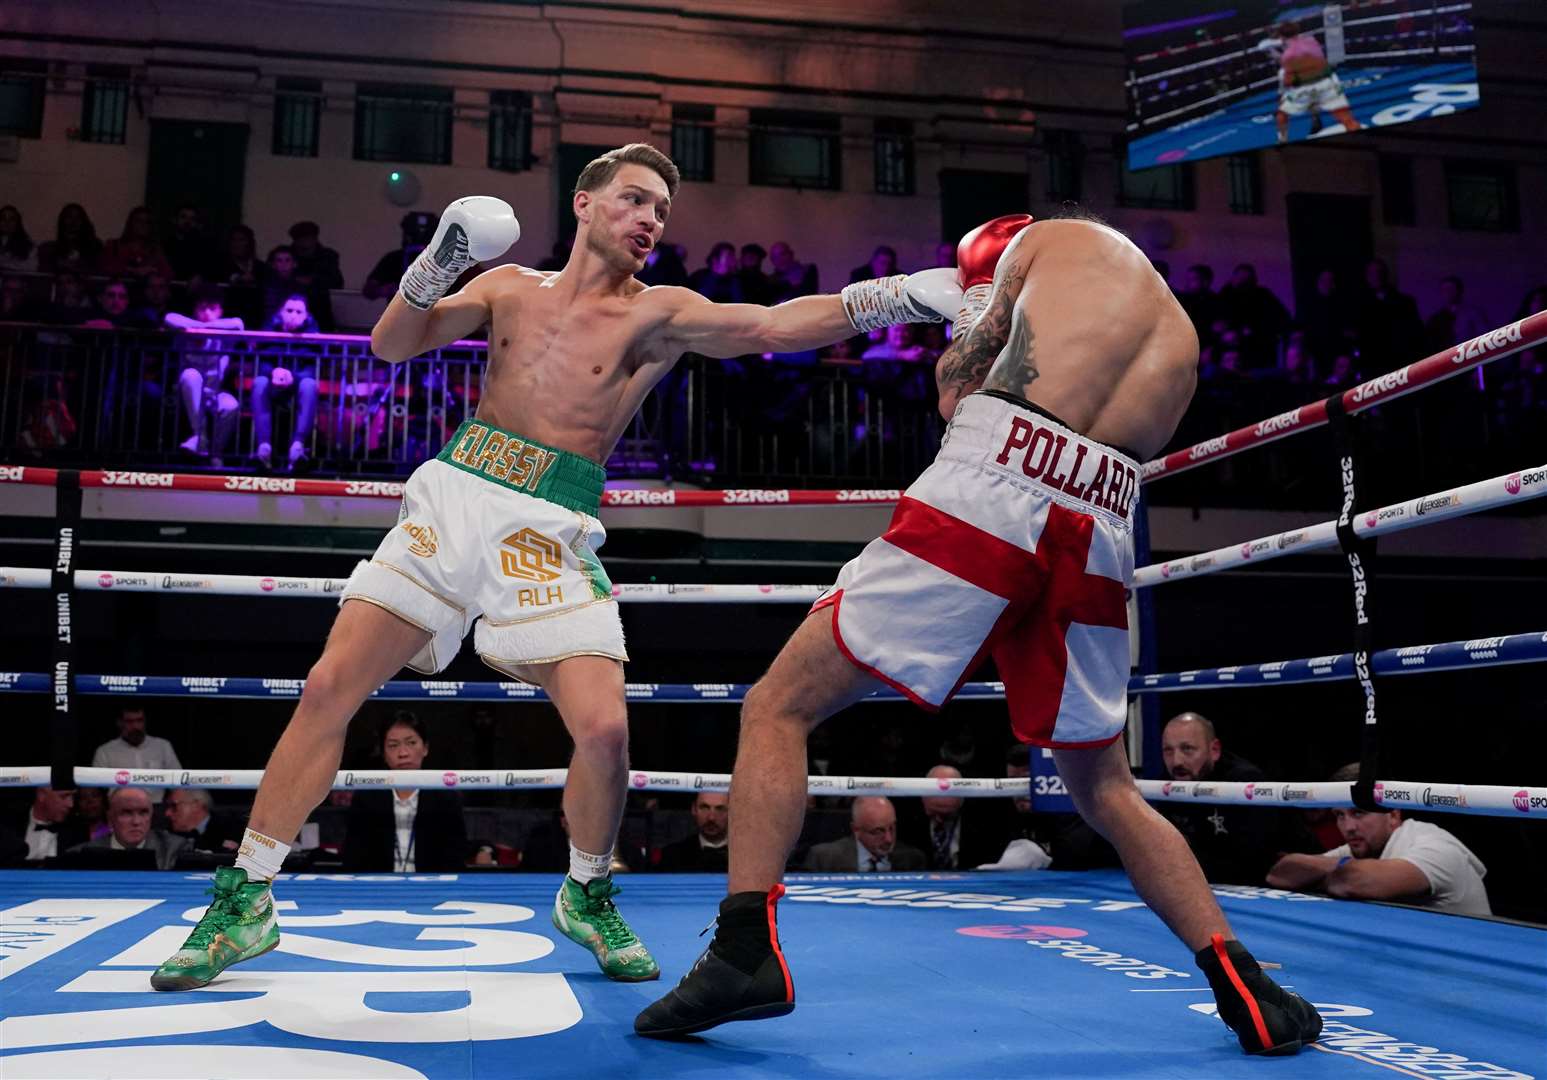 Charlie Hickford wins at York Hall on his professional debut against Jake Pollard Picture: Stephen Dunkley / Queensbury Promotions